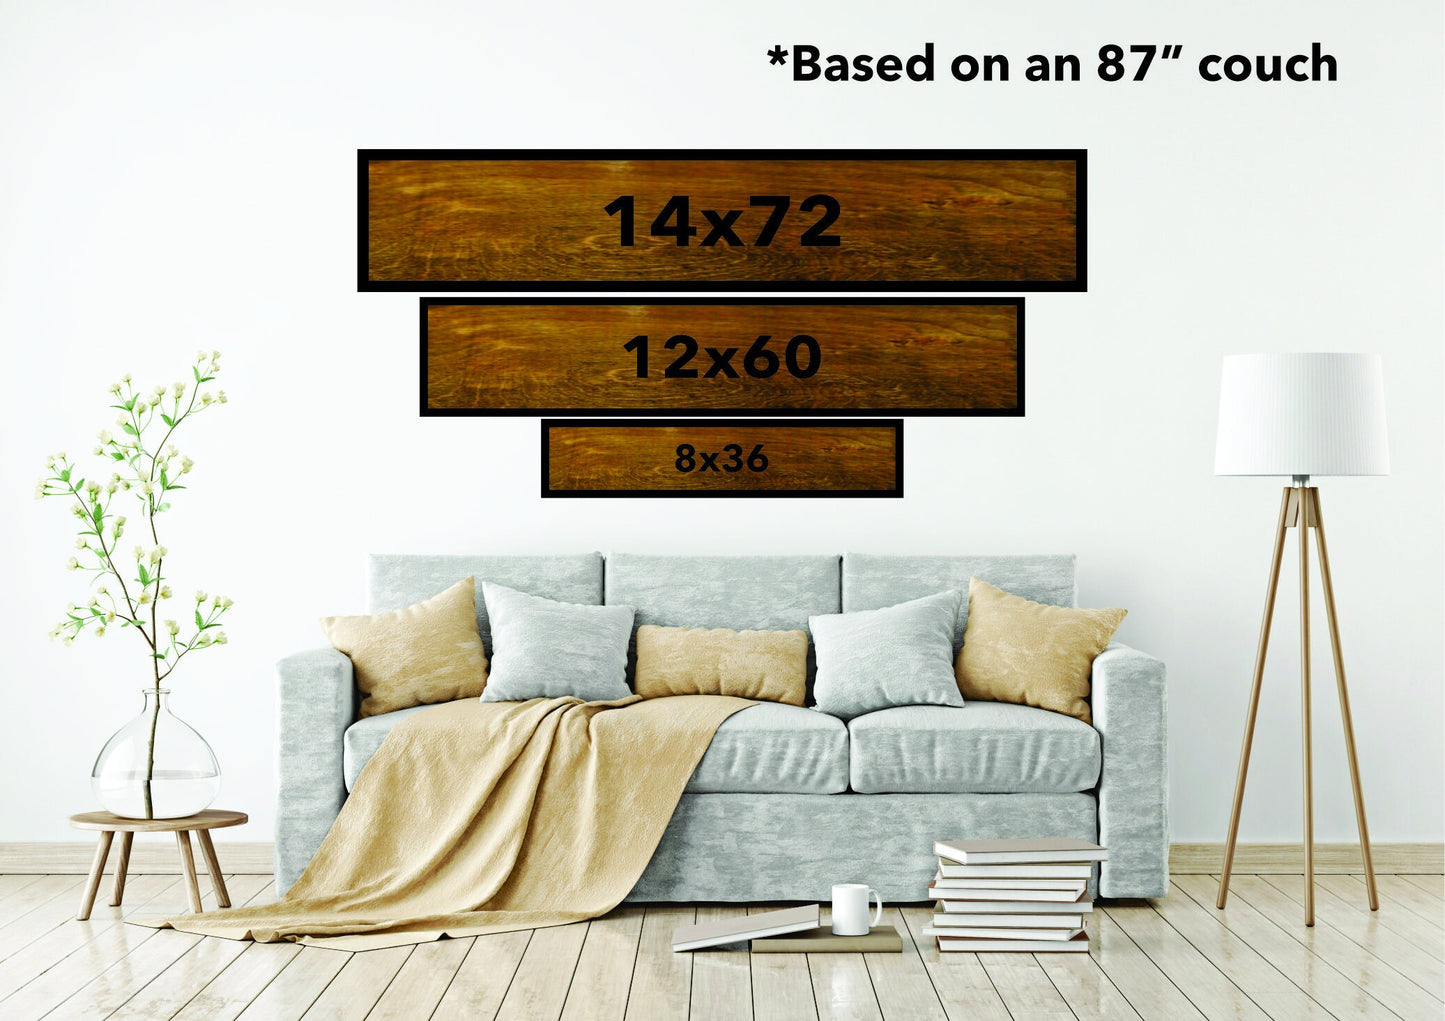 Lets Stay Home, Large family sign, wood, 3D, Raised Text, fireplace, living room, dining room, shabby cottage, chic, farmhouse, rustic decor